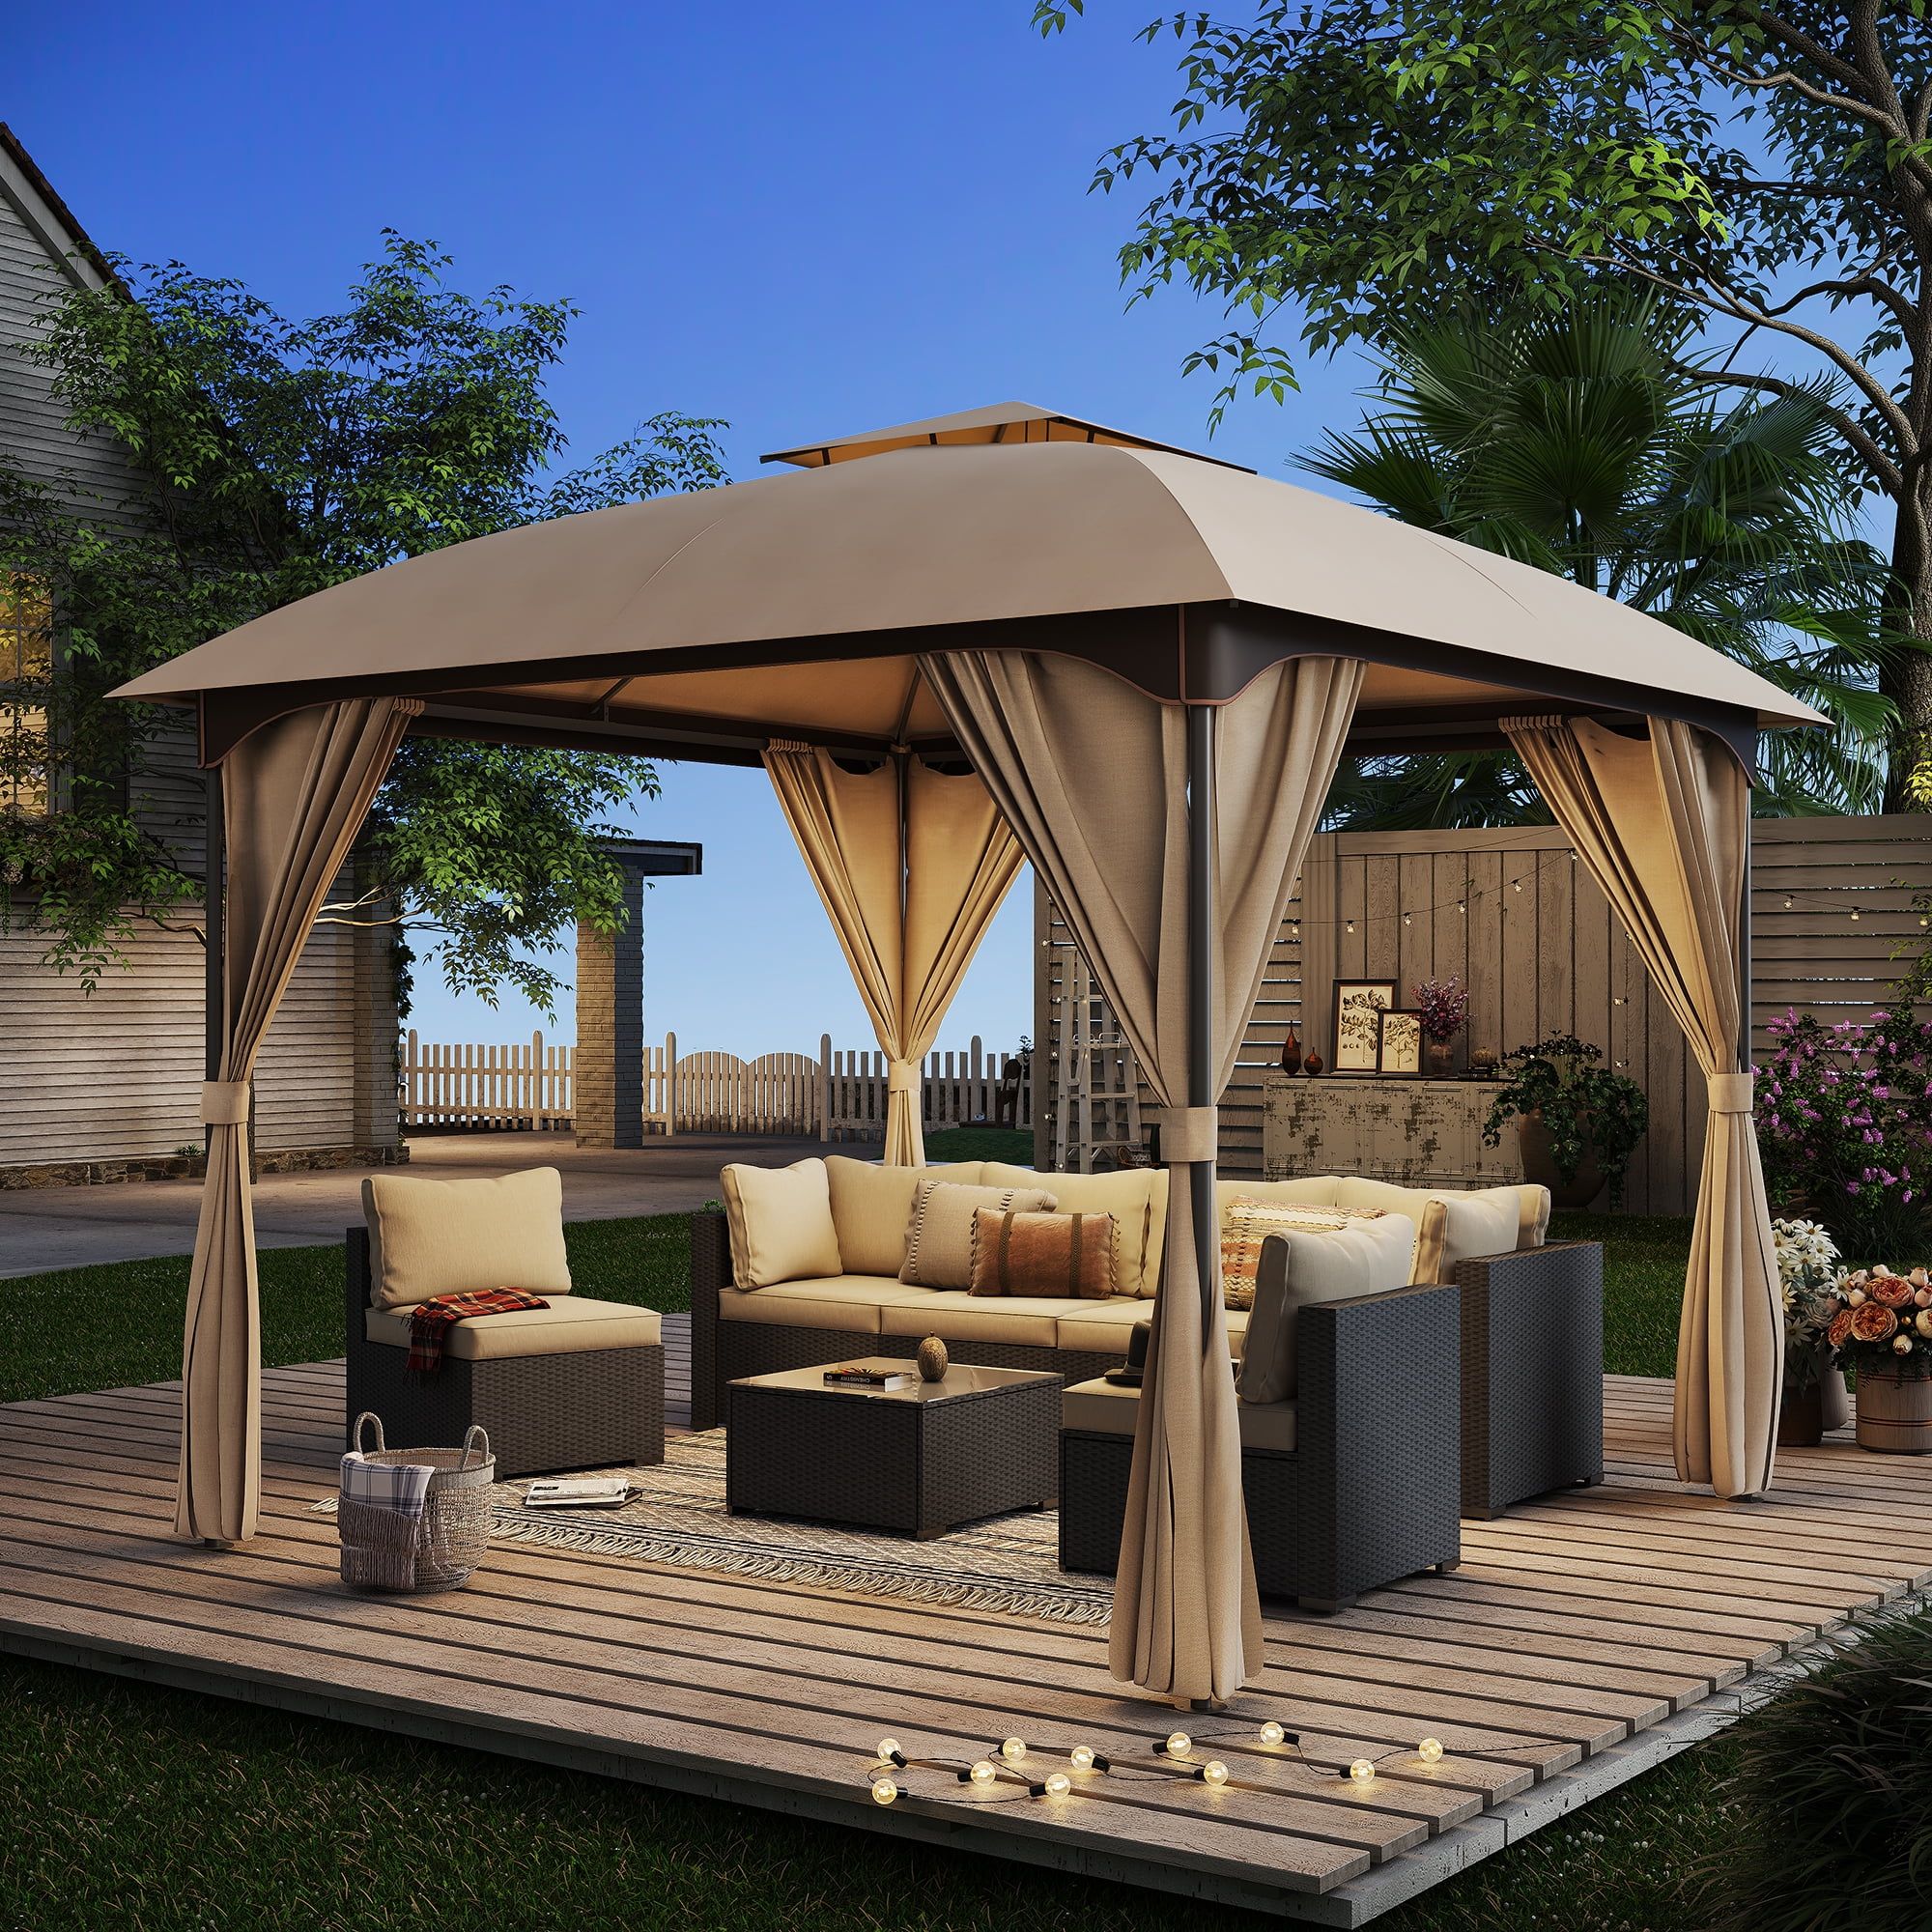 LAUSAINT HOME 10'x10' Outdoor Gazebo, Unique Arc Roof Design and Privacy Curtains Included, Khaki... | Walmart (US)